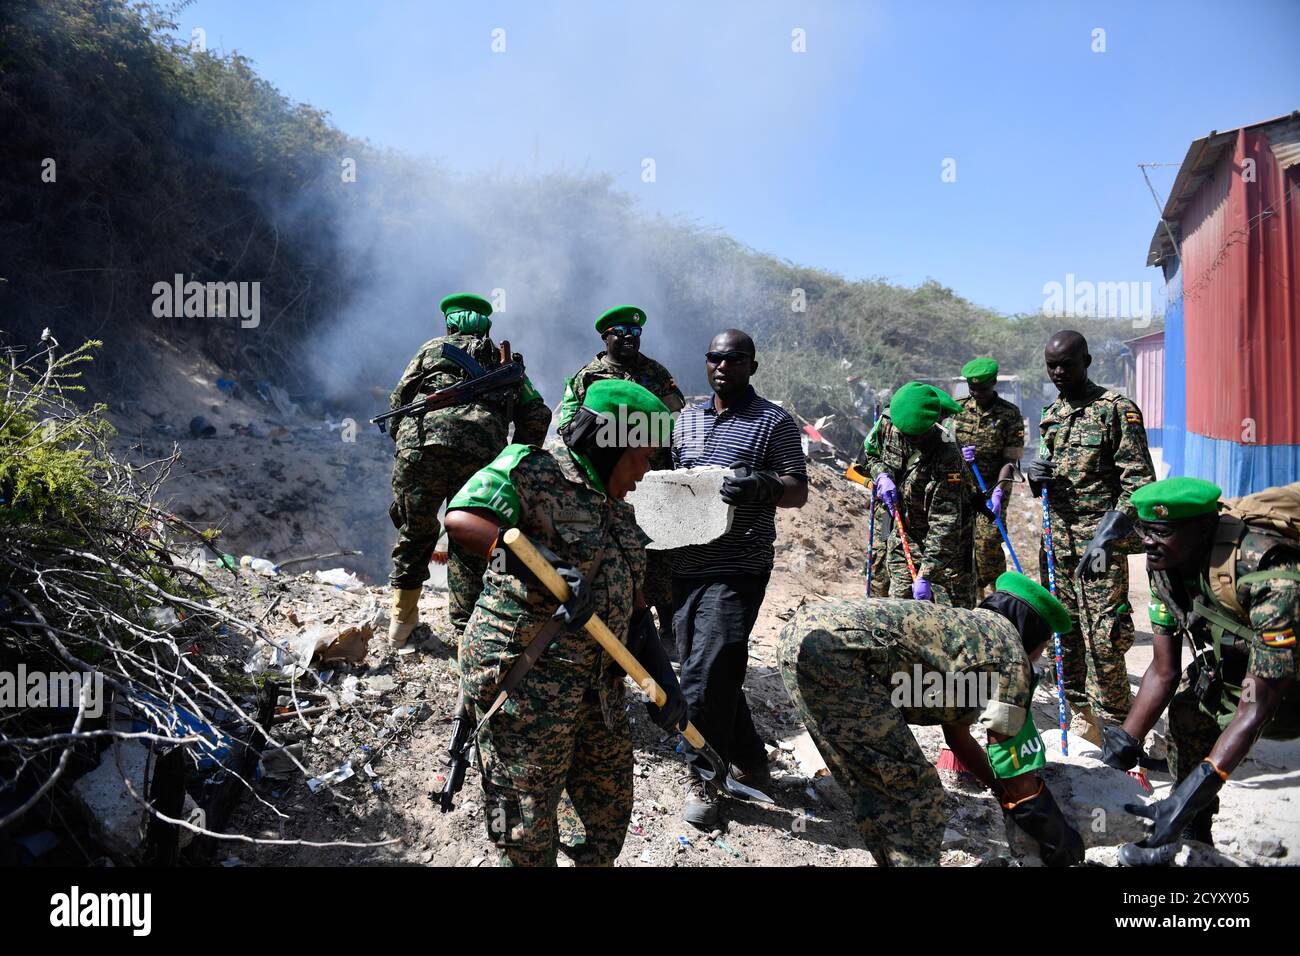 Ugandan soldiers serving under the African Union Mission in Somalia (AMISOM) carry out a community cleanup exercise in Mogadishu, Somalia on February 06, 2019. This was part of activities organised by the Ugandan military to mark 'Tarehe Sita' day in commemoration of the 38th anniversary of the founding of the Uganda People's Defence Forces (UPDF) on 06 February 1981. Stock Photo